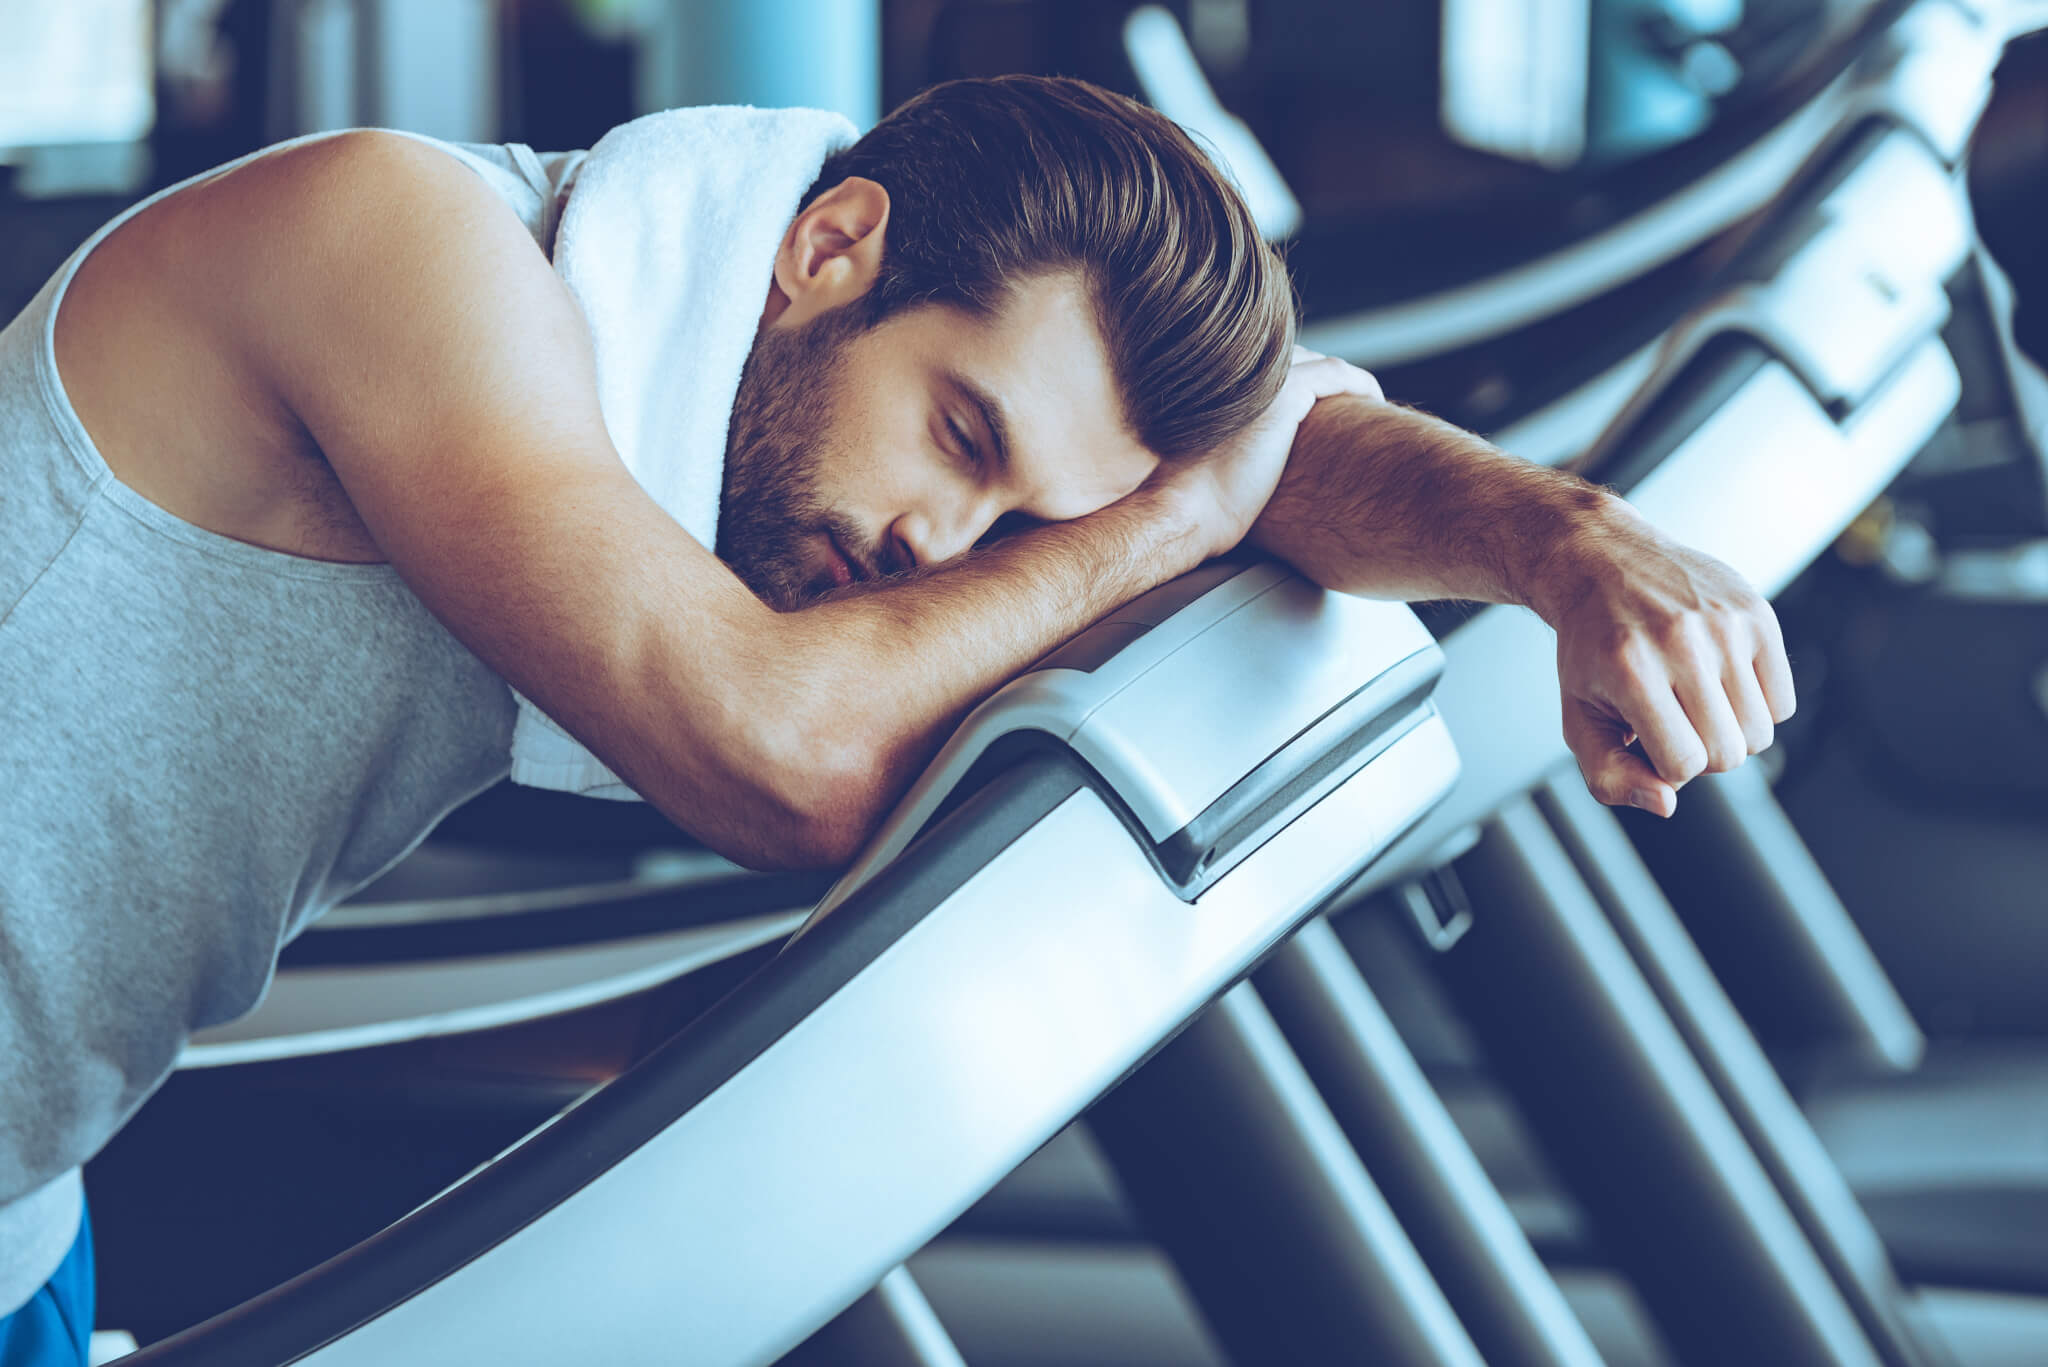 Man Claims People Have 'Zero Excuses' Not To Exercise If A